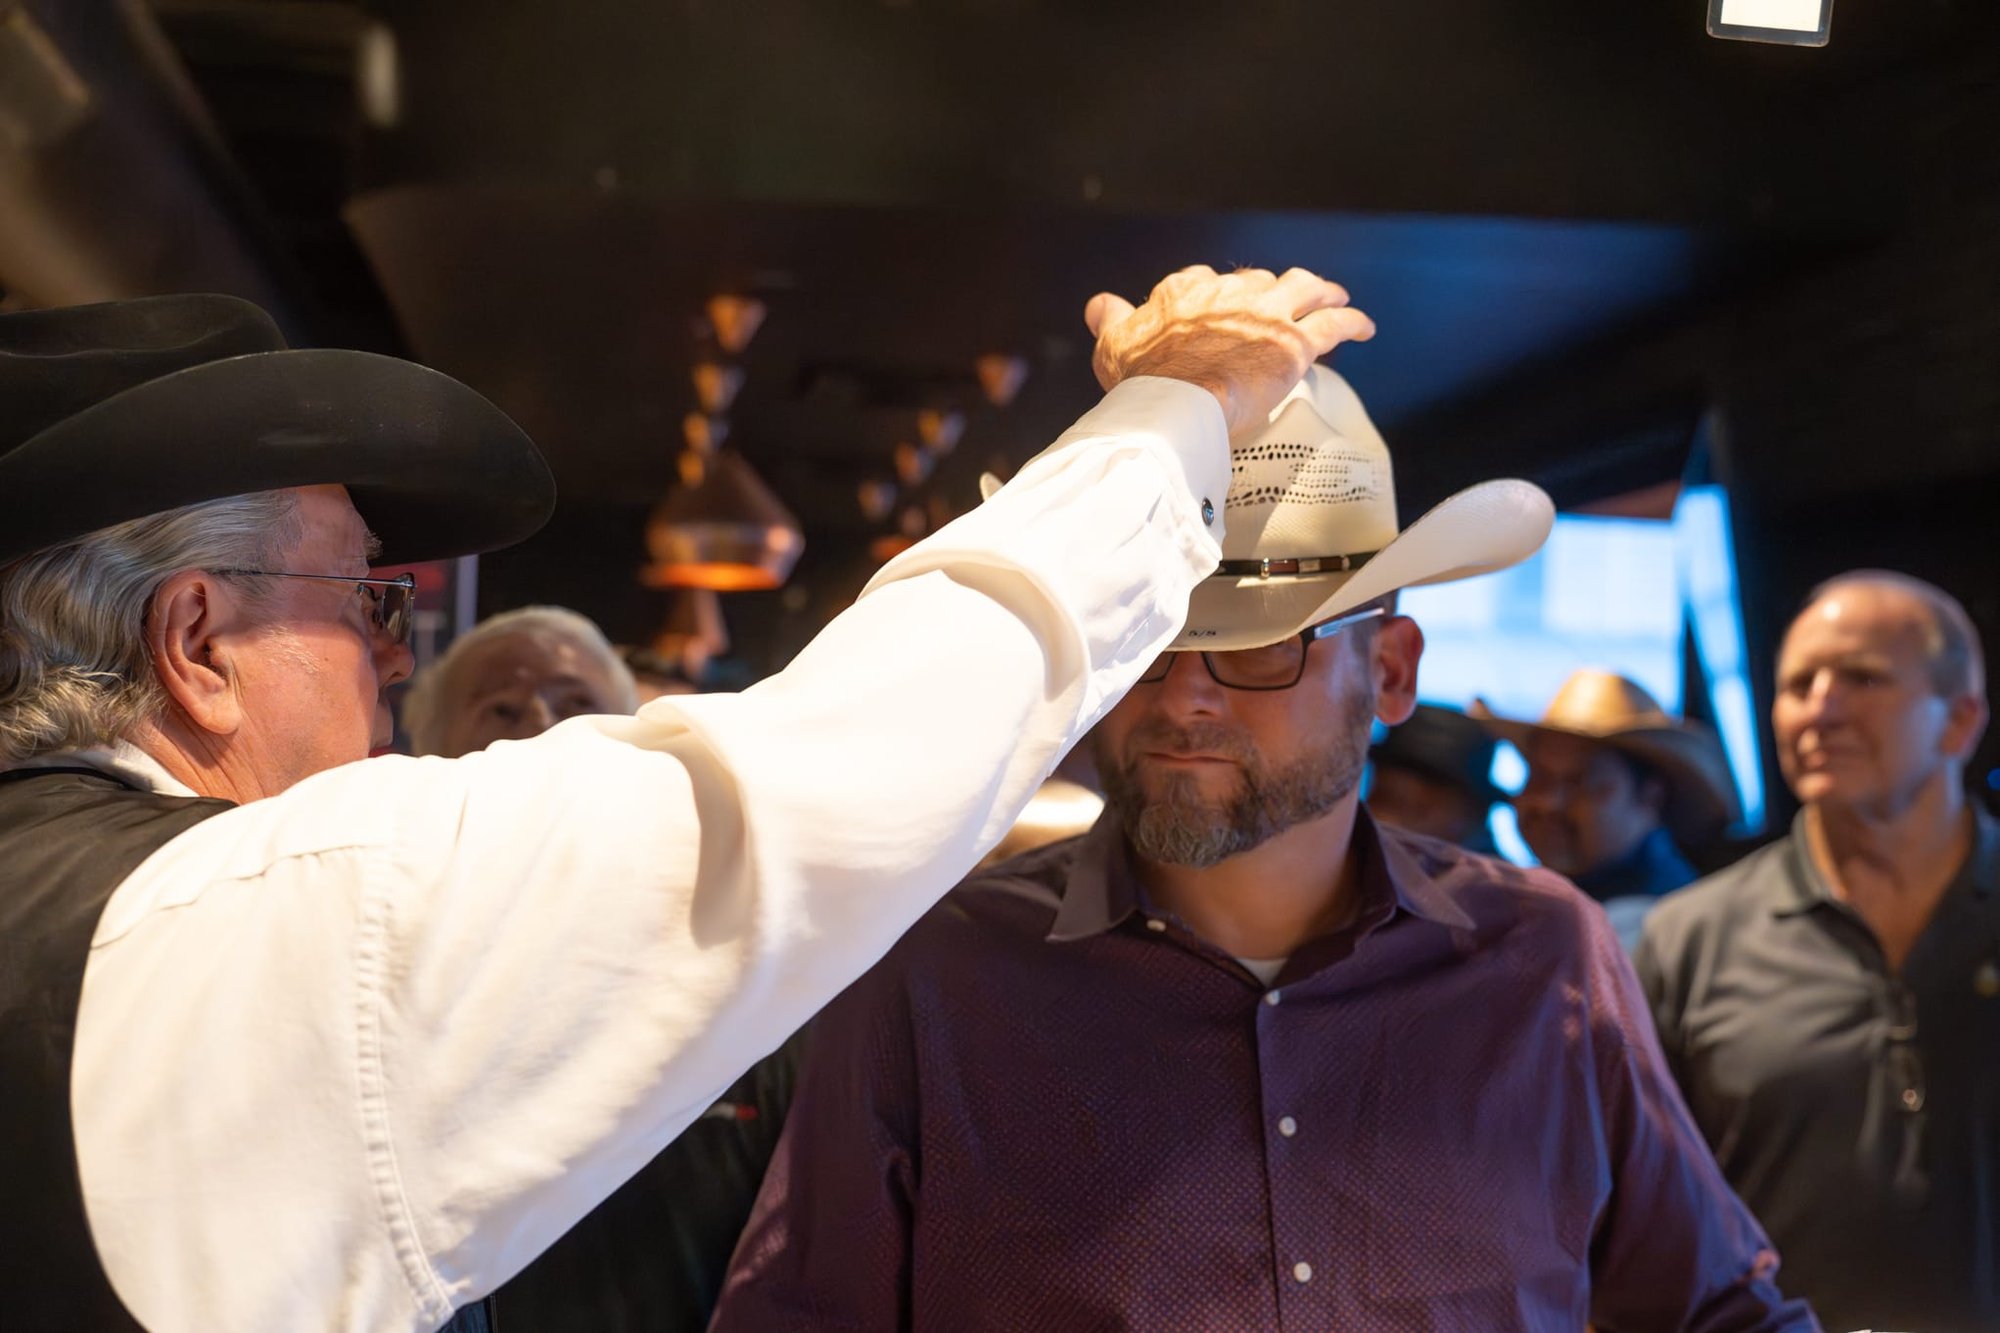 Wild Bill makes custom cowboy hats for Security 101’s Appreciation Event attendees at the Happiest Hour rooftop bar